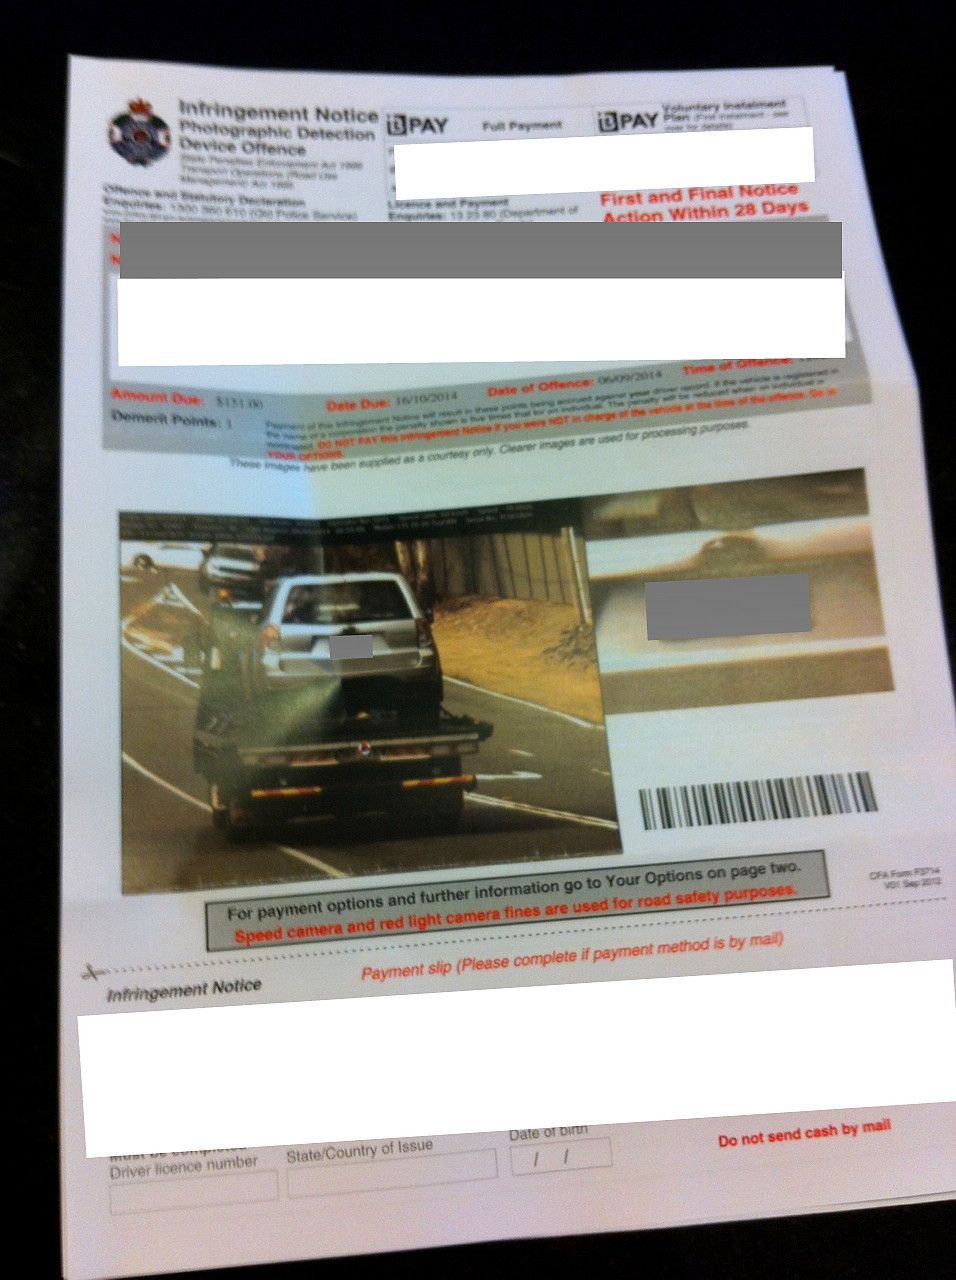 Guy gets hit while at a red light, car totaled. 4 weeks later he gets a speeding ticket in the mail.